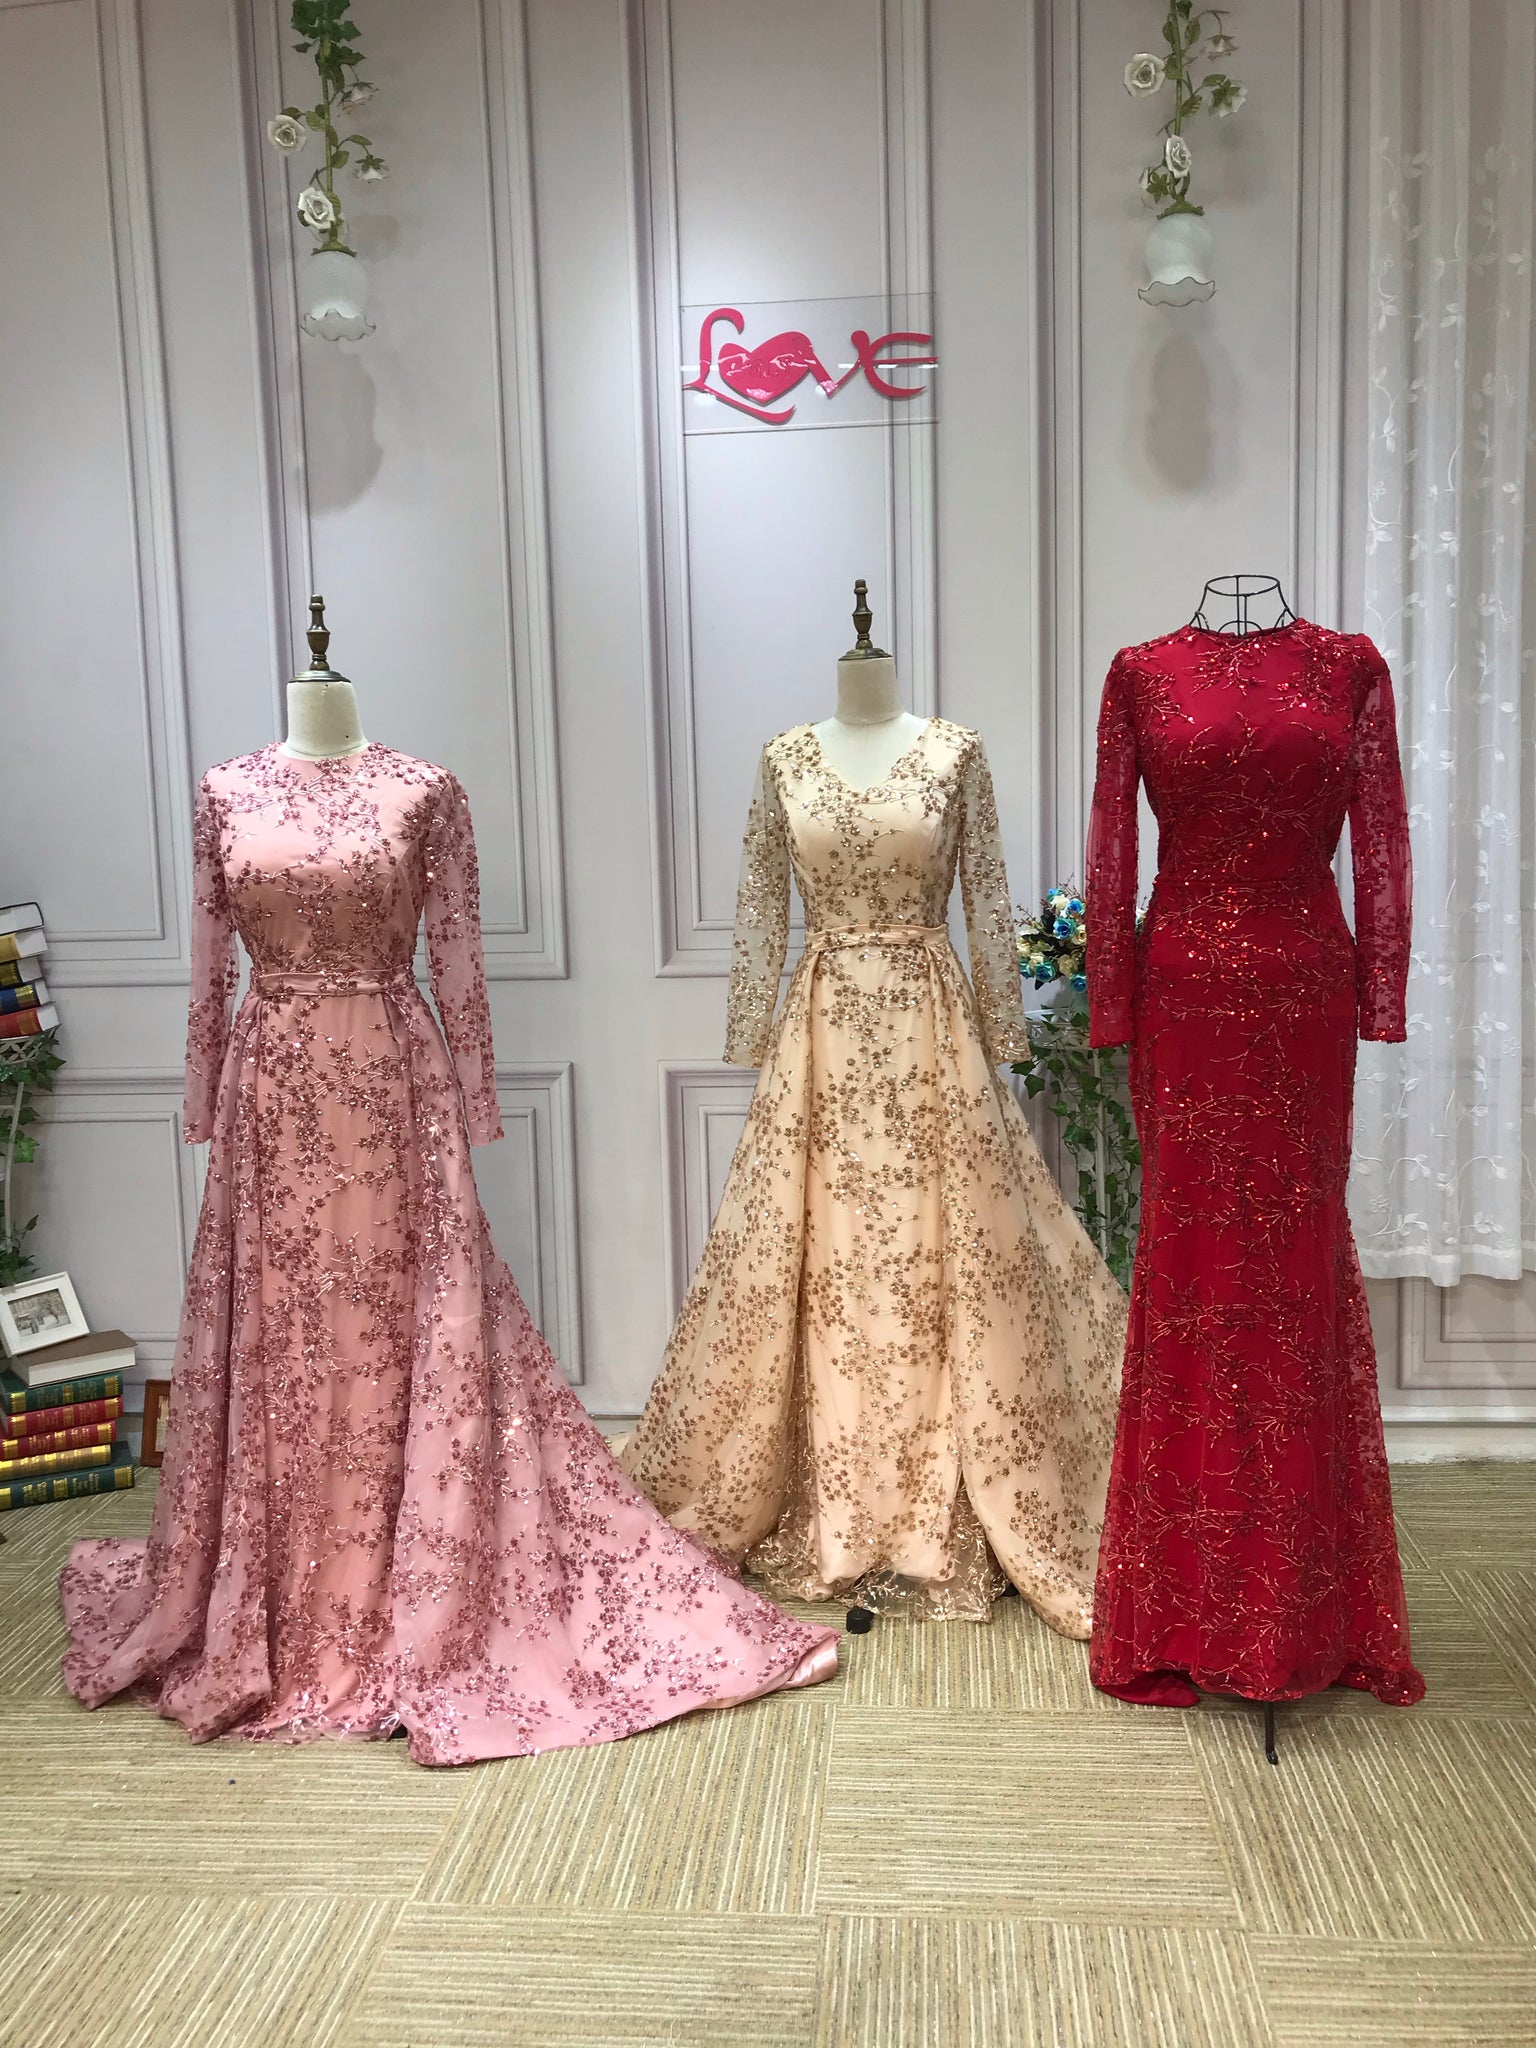 Elegant Dusty Pink Organza Evening Gowns With Slits With One Shoulder And  High Split 2021 Dubai Formal Gown For Parties, Proms, And Arabic Middle  Eastern Events From Verycute, $37.81 | DHgate.Com